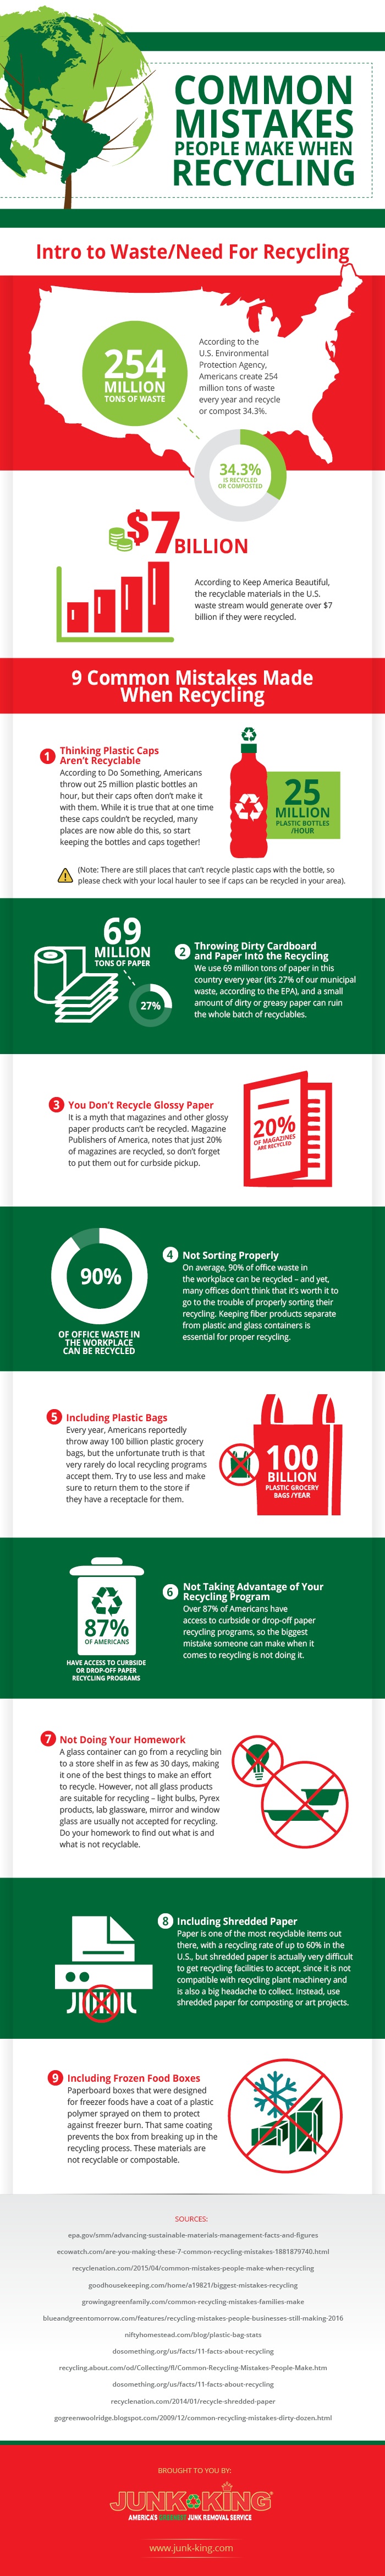 http://info.junk-king.com/hs-fs/hubfs/Common_Mistakes_People_Make_When_Recycling_Infographic.jpg?t=1476376735972&width=1050&name=Common_Mistakes_People_Make_When_Recycling_Infographic.jpg